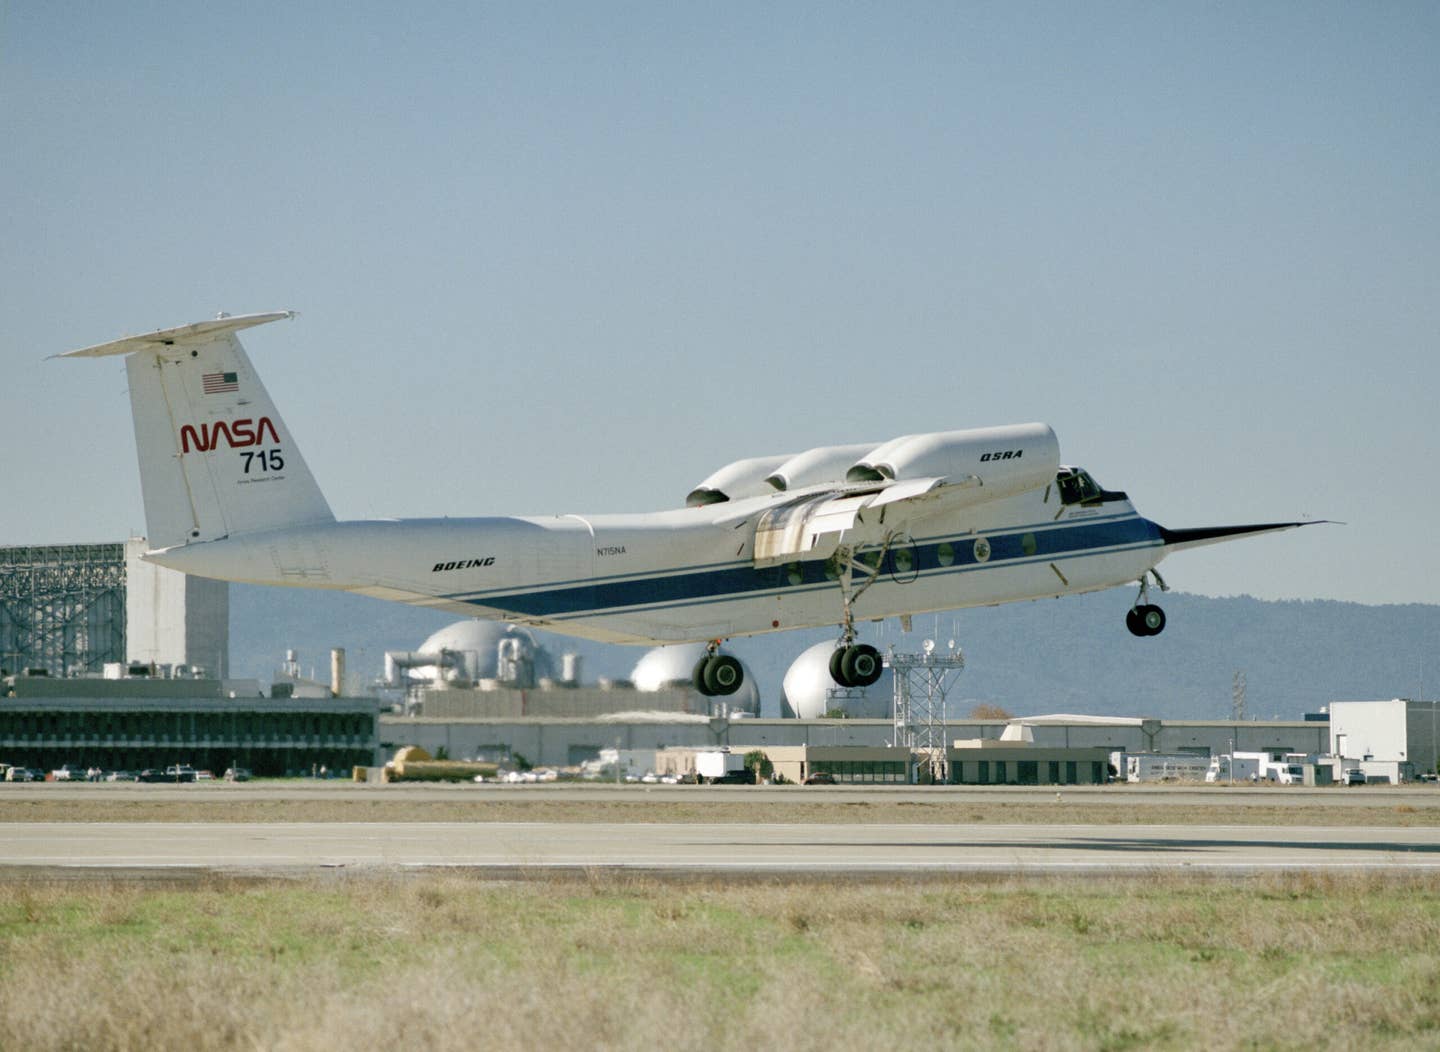 Seen in better days, the QSRA takes off in front of the NASA Ames National Full-Scale Aerodynamic Facility (a 40-by-80-by-120-foot wind tunnel and Outdoor Aerodynamic Research Facility) during the dedication of the facility in 1987. <em>NASA</em>